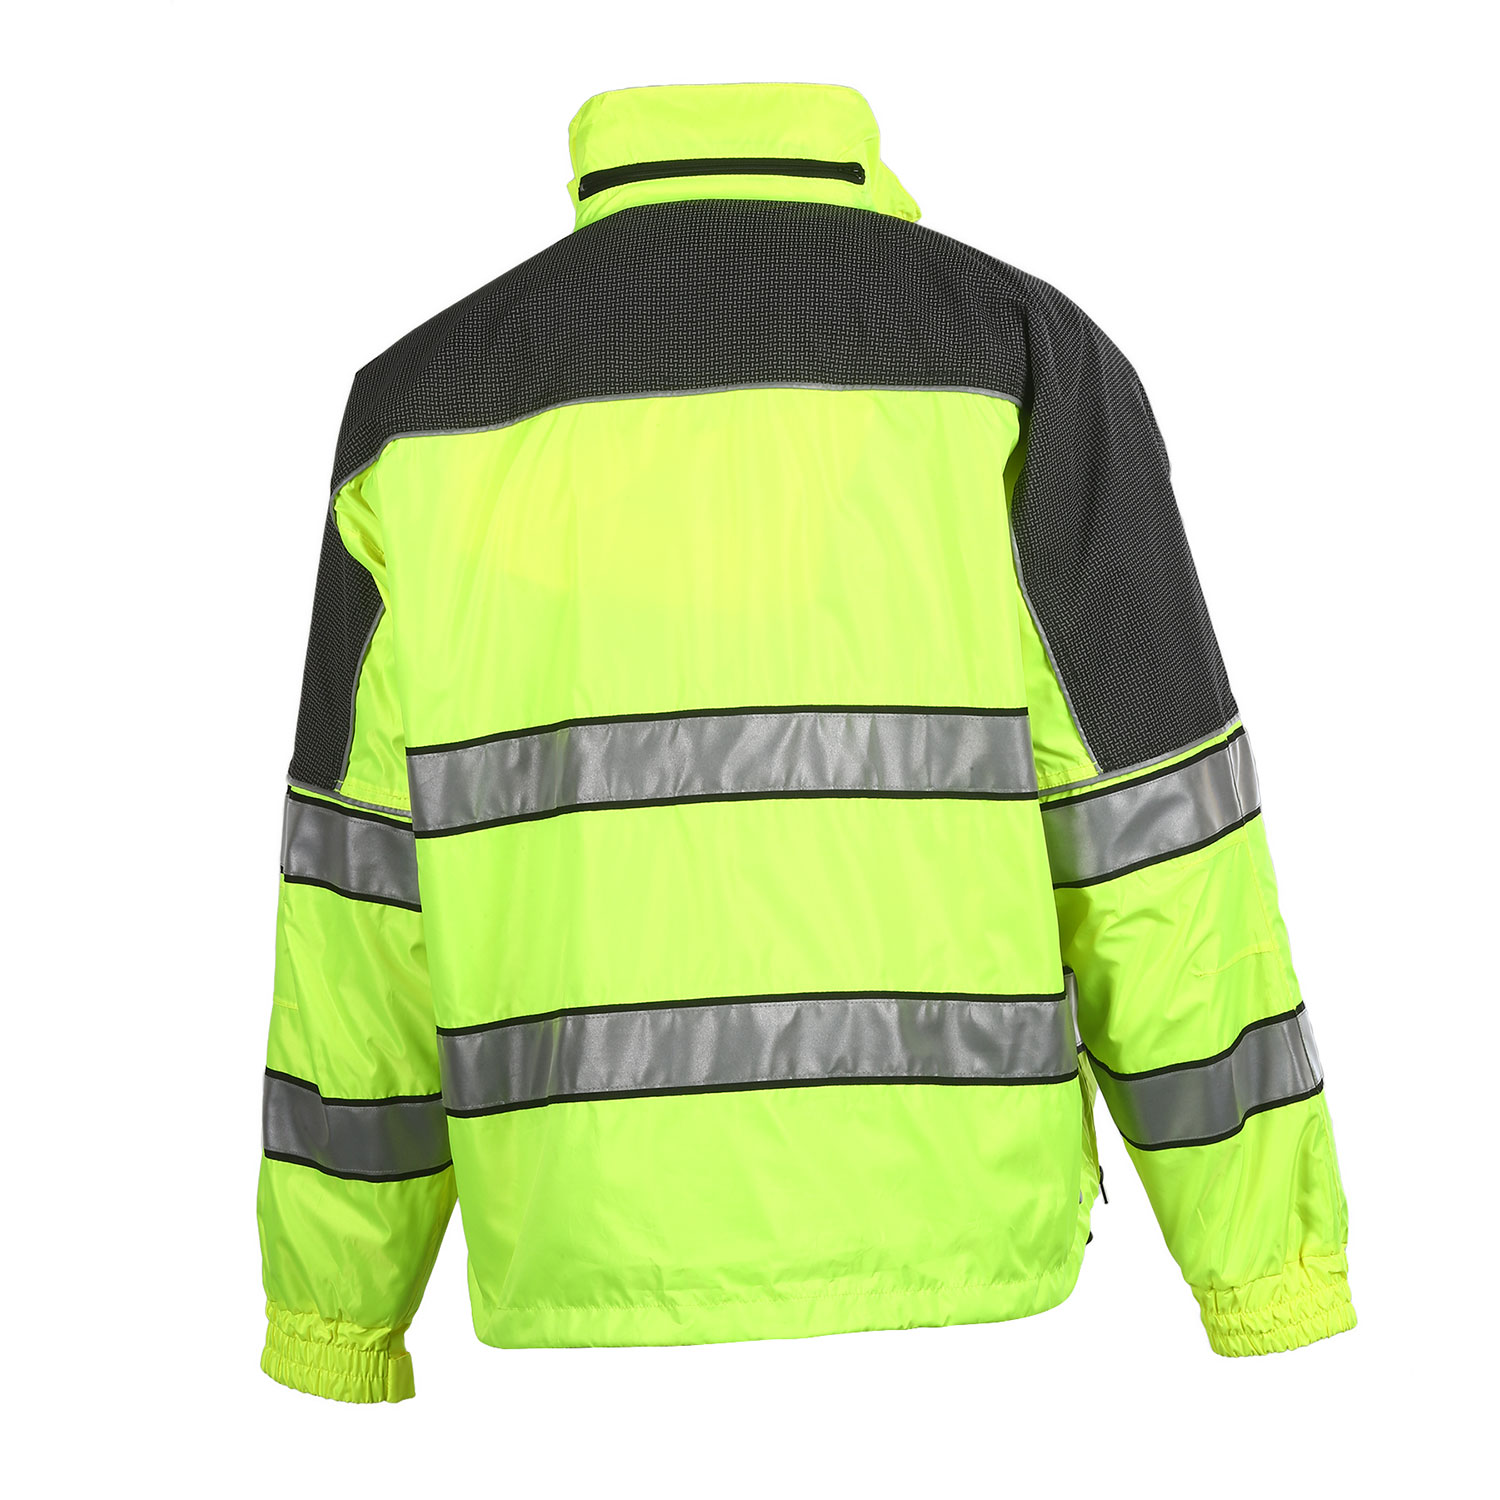 Gerber Outerwear Eclipse SX Lime Jacket with Warrior Softshe